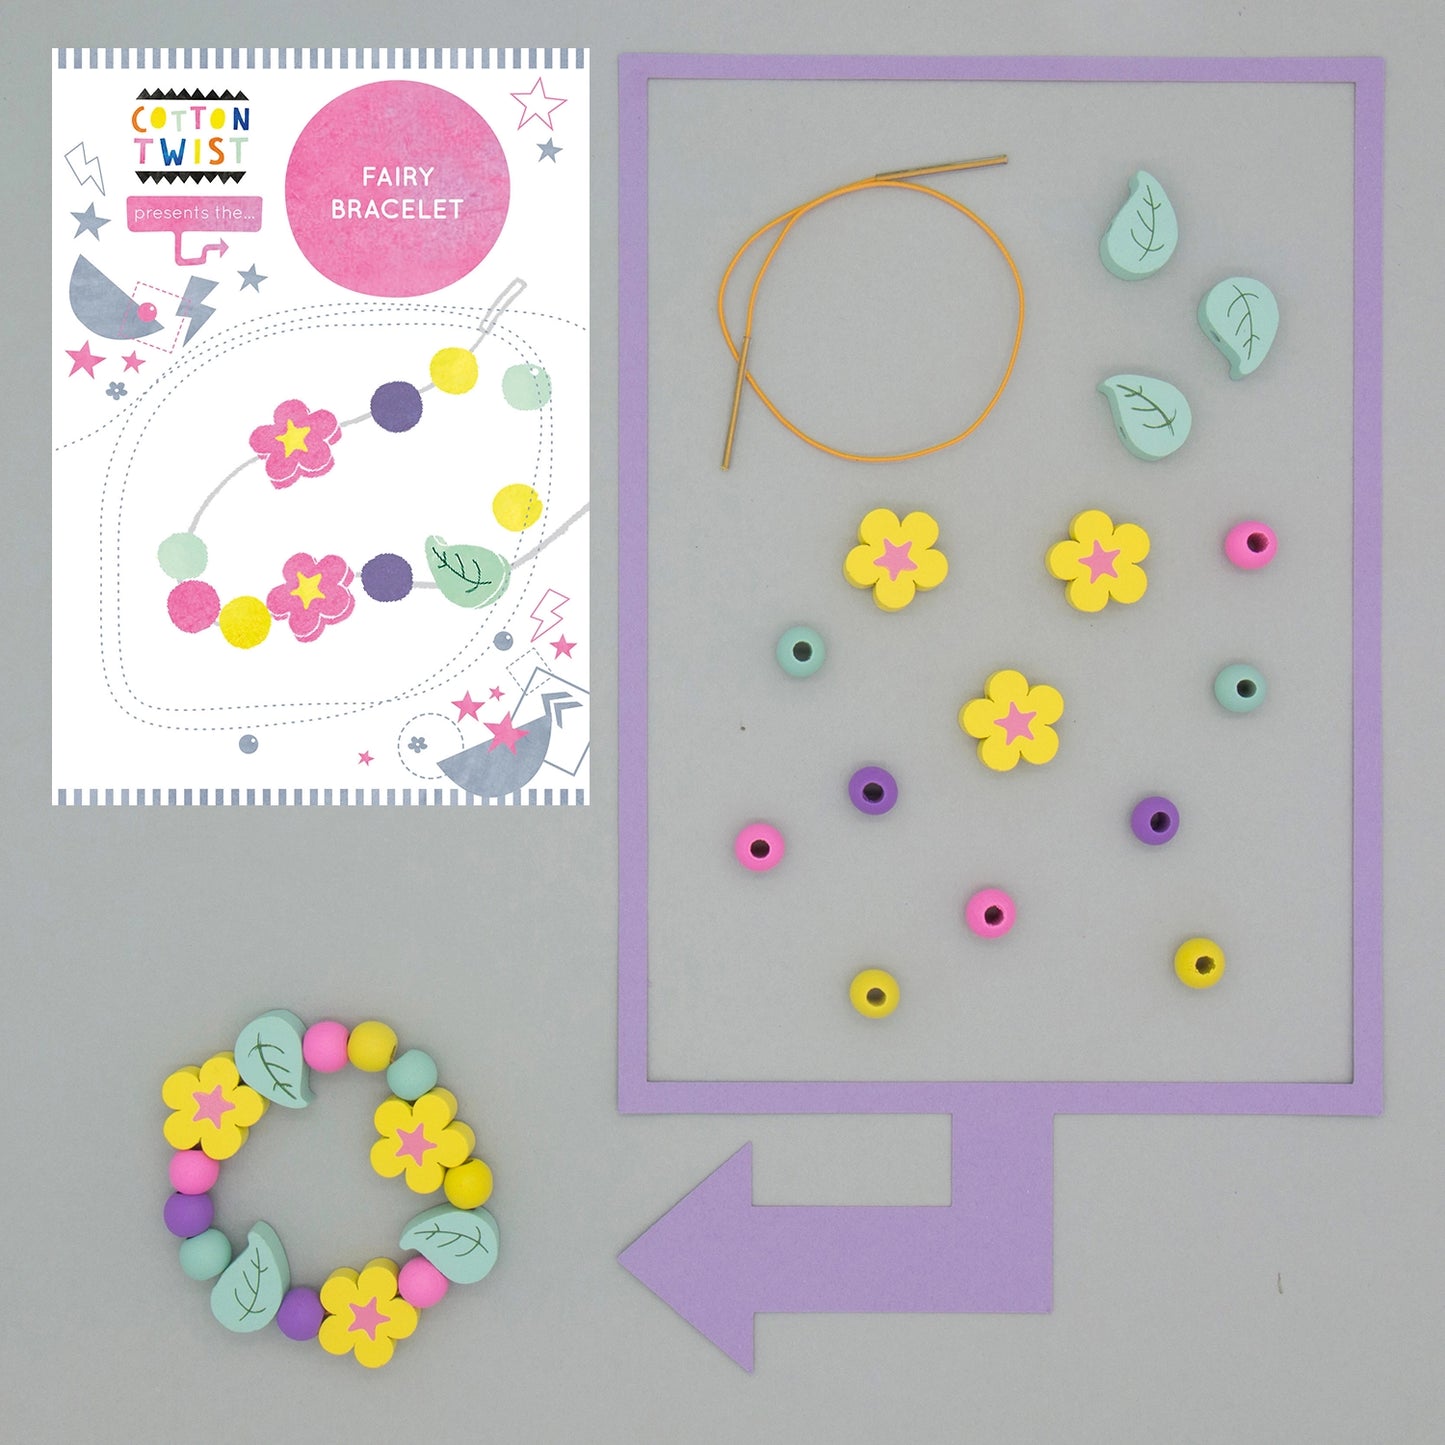 Make Your Own Fairy Bracelet Gift Kit By Cotton Twist